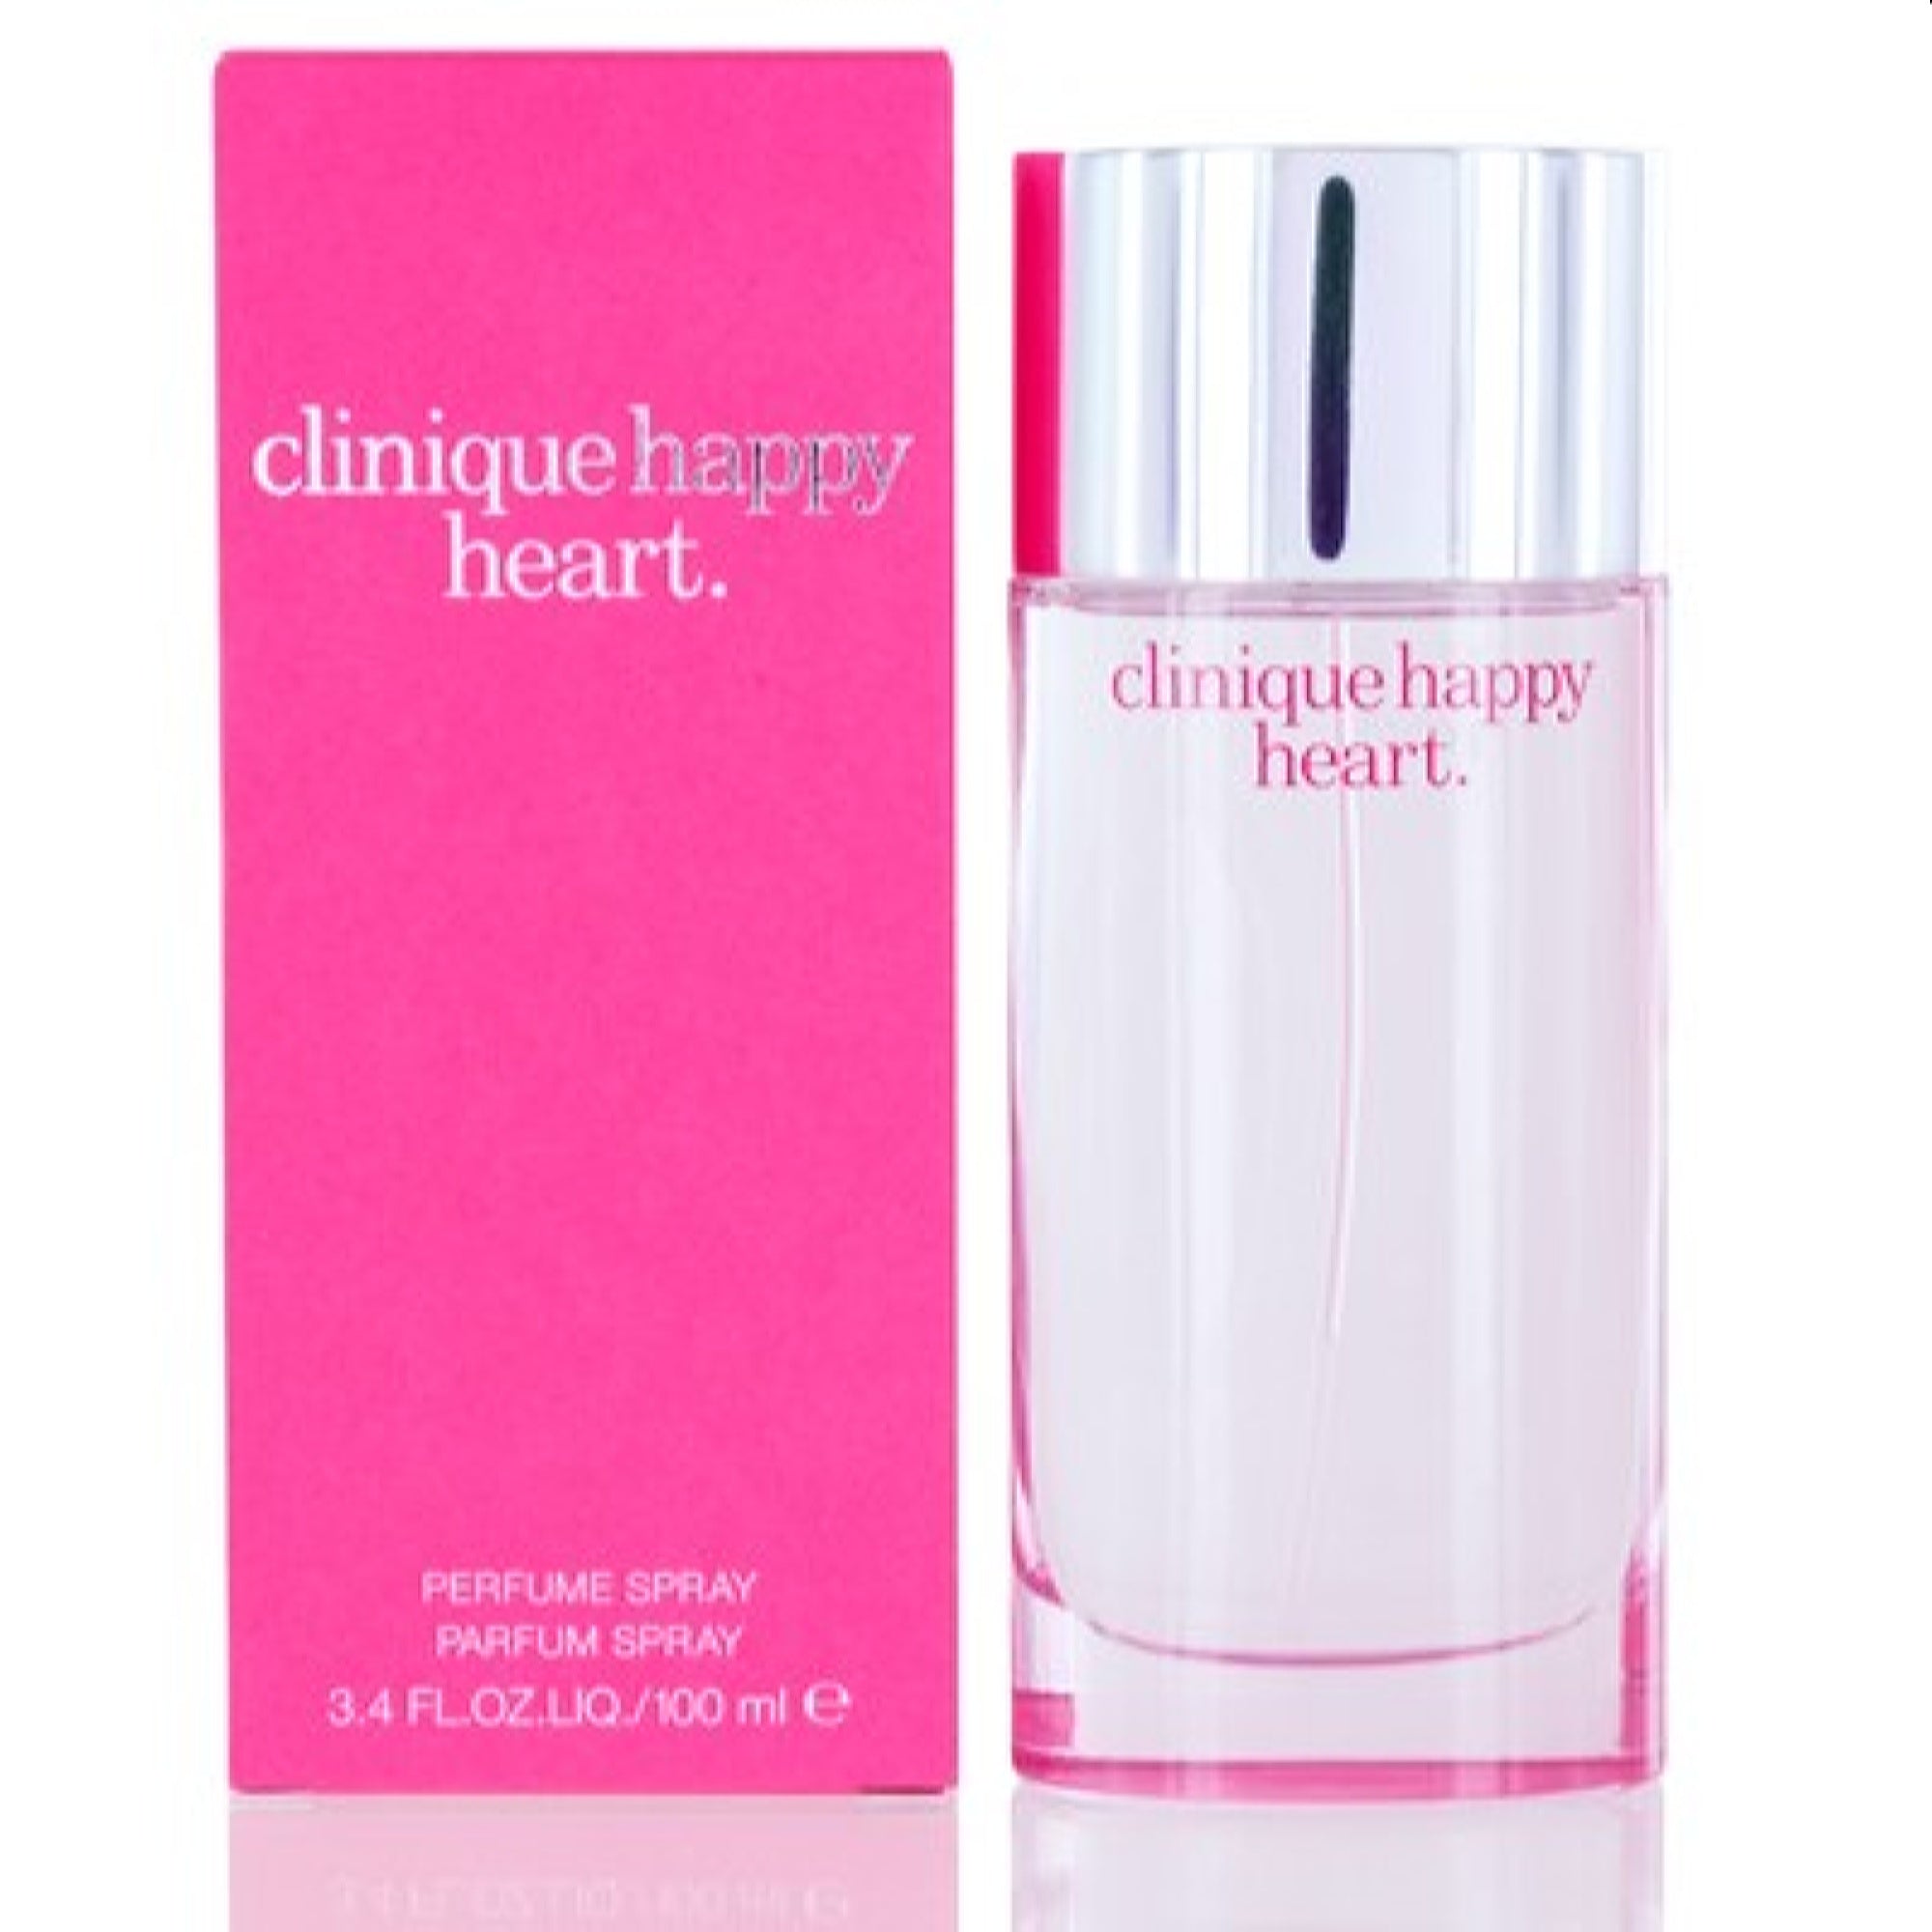 svært overdrive At accelerere Happy Heart Clinique Perfume Spray New Packaging 3.4 Oz (100 Ml) For W -  Bezali